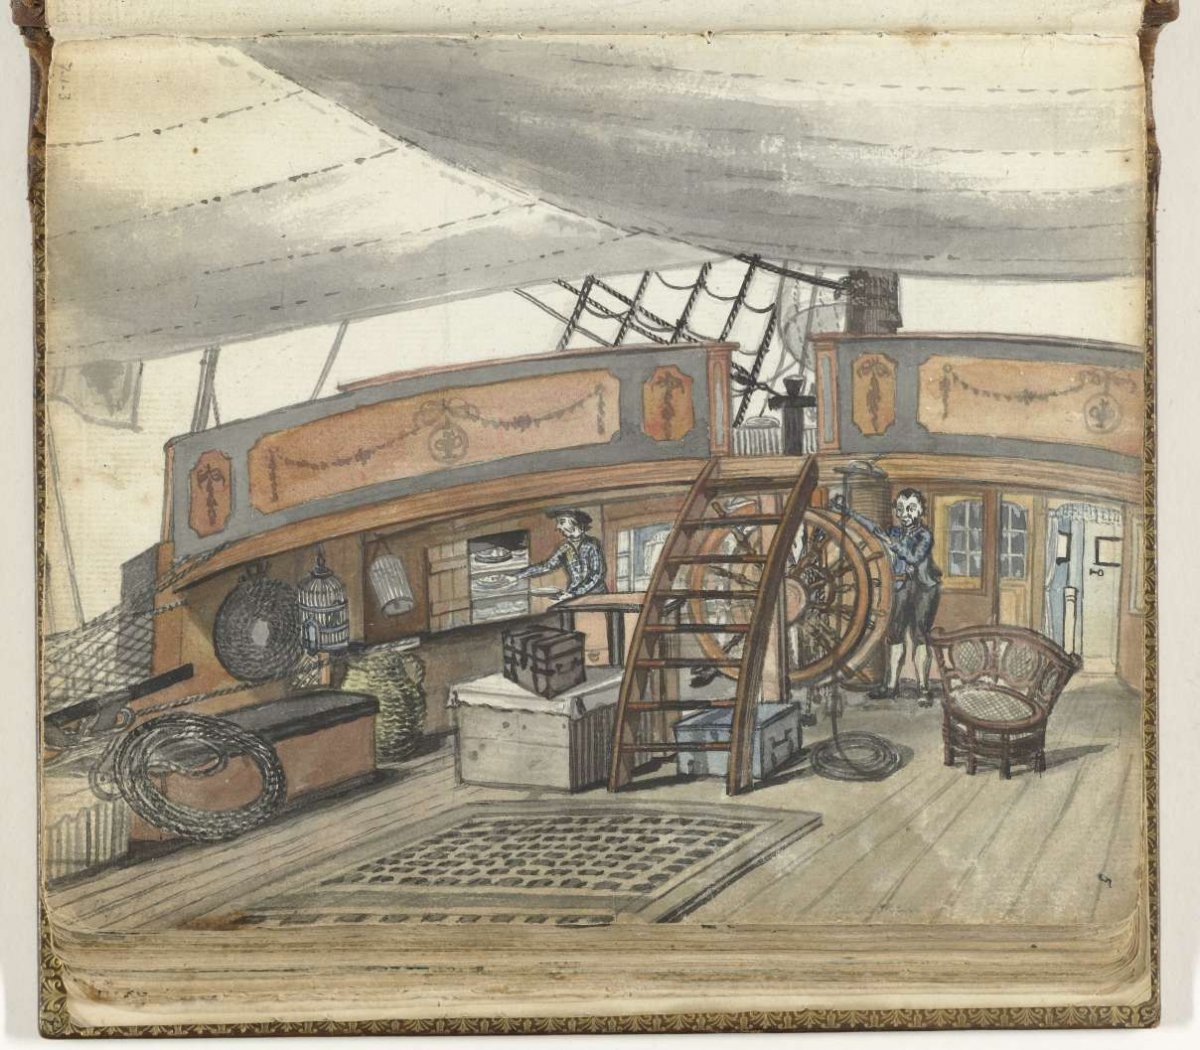 Deck view of an East Indiaman with helmsman at the helm, Jan Brandes, 1779 - 1787